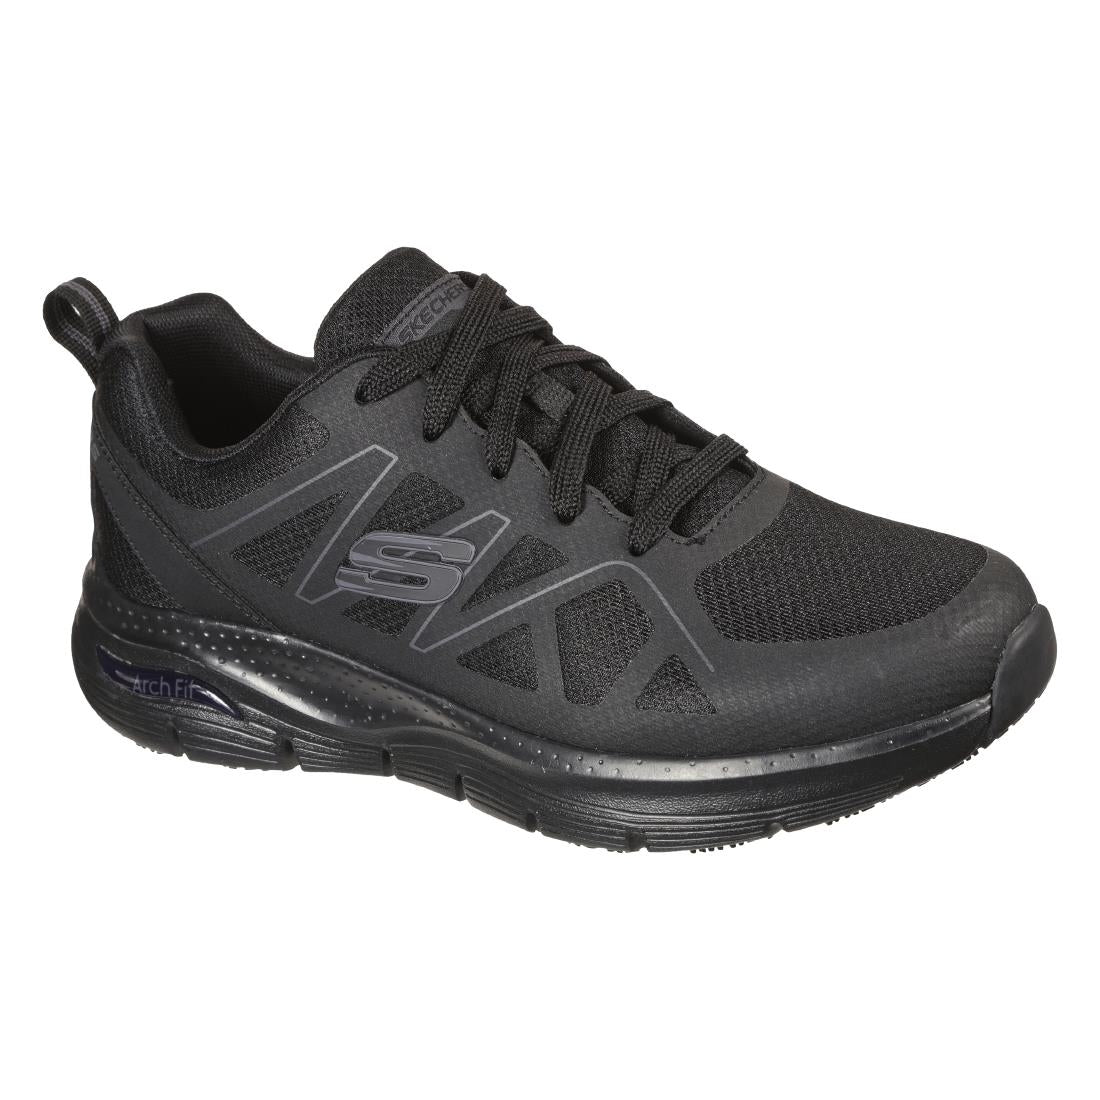 BB673-47.5 Skechers Axtell Slip Resistant Arch Fit Trainer Size 47.5 JD Catering Equipment Solutions Ltd